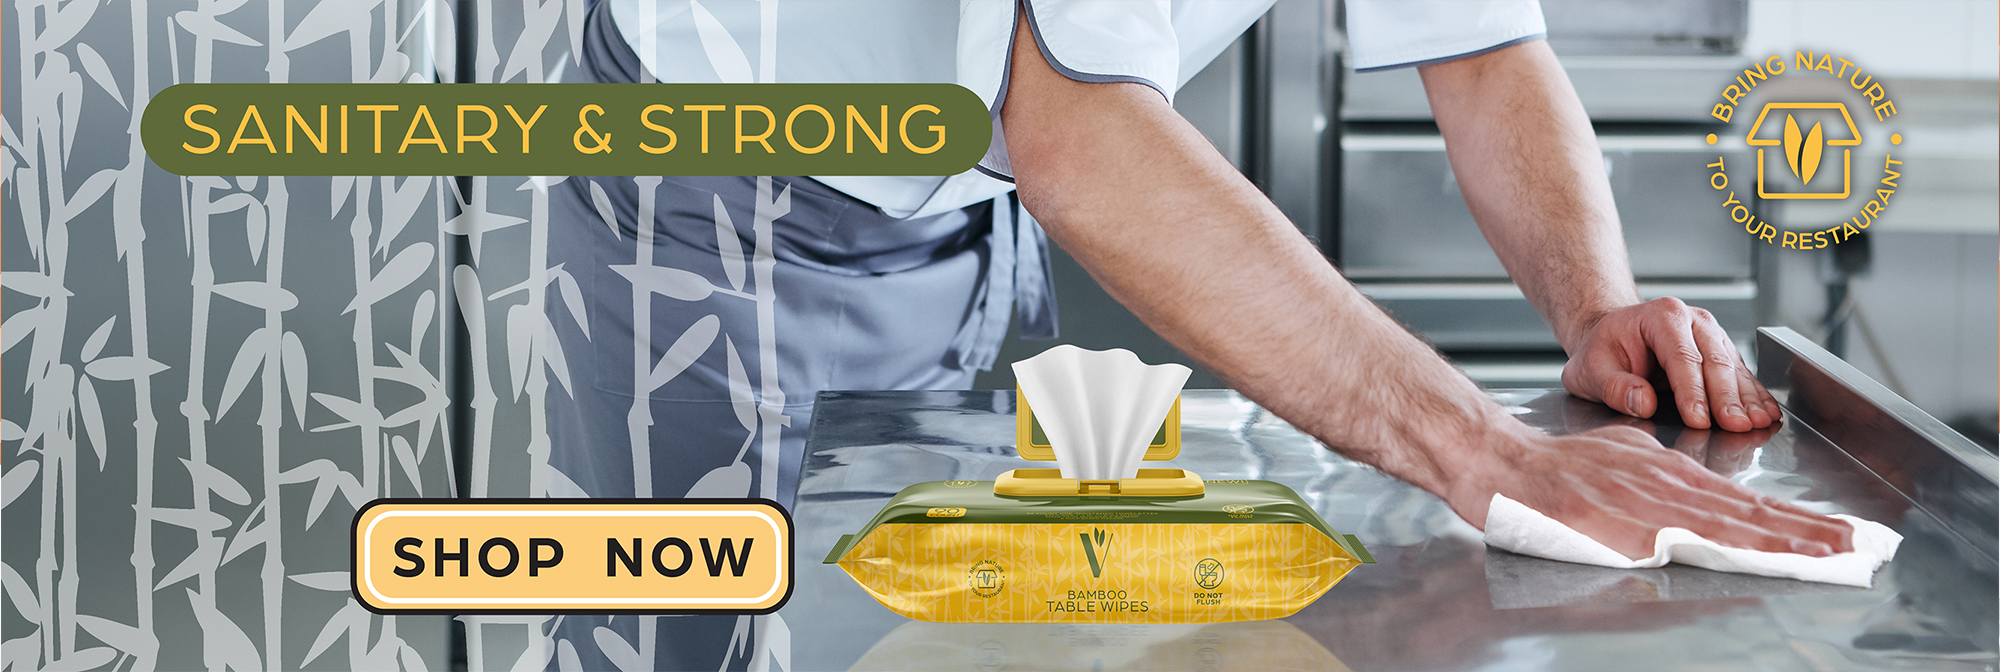 Sanitary and Strong. Bring nature to your restaurant. Shop Now.